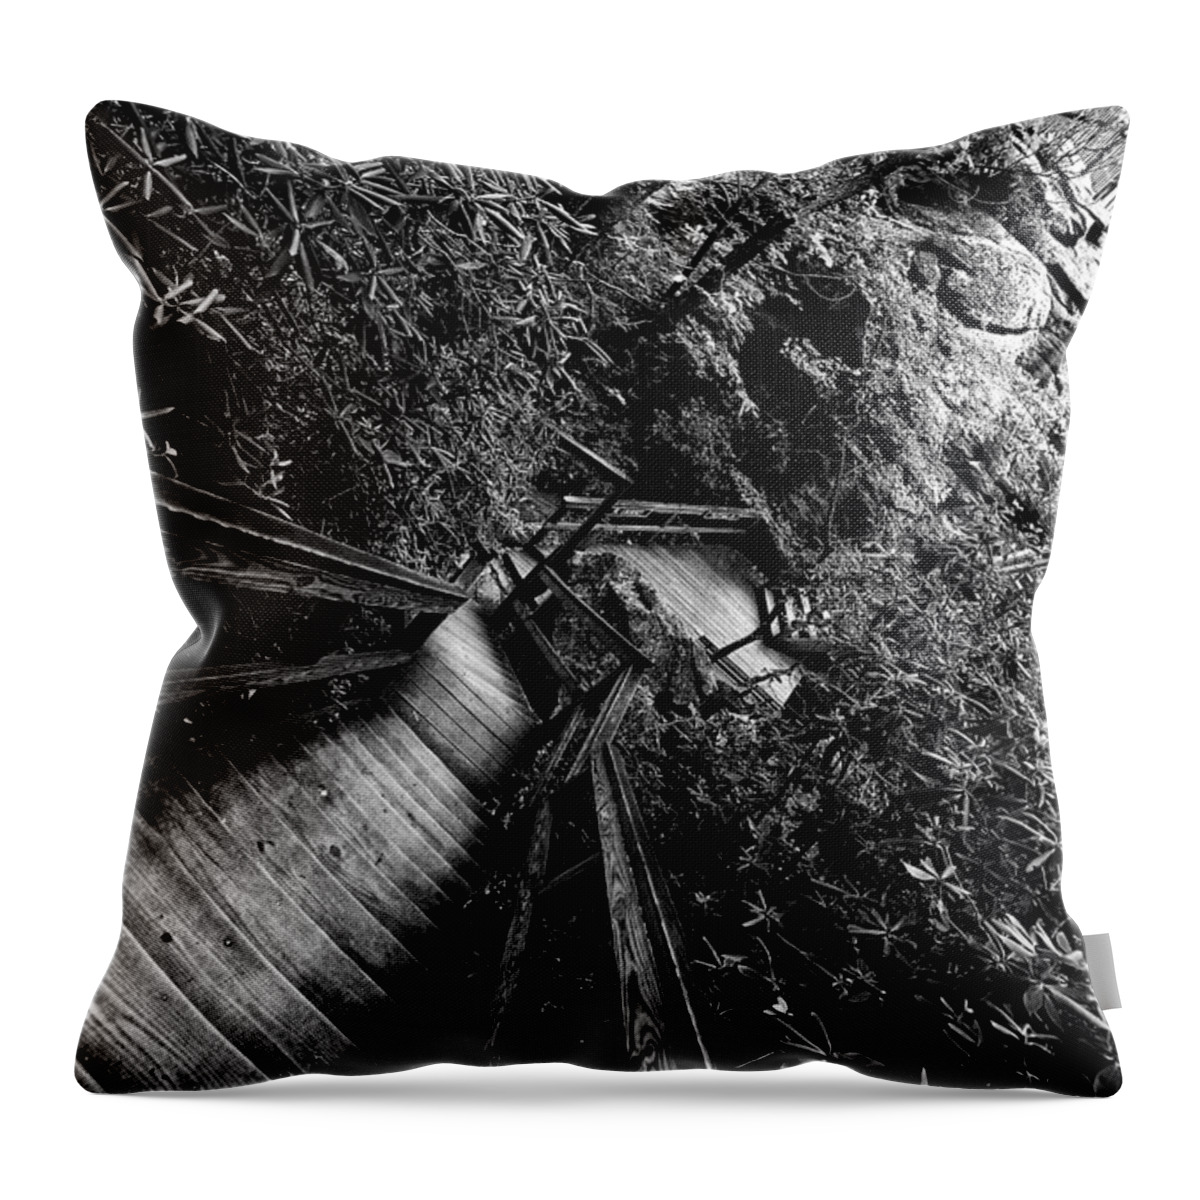 Walkway Throw Pillow featuring the photograph Passage Way by Kevin Cable